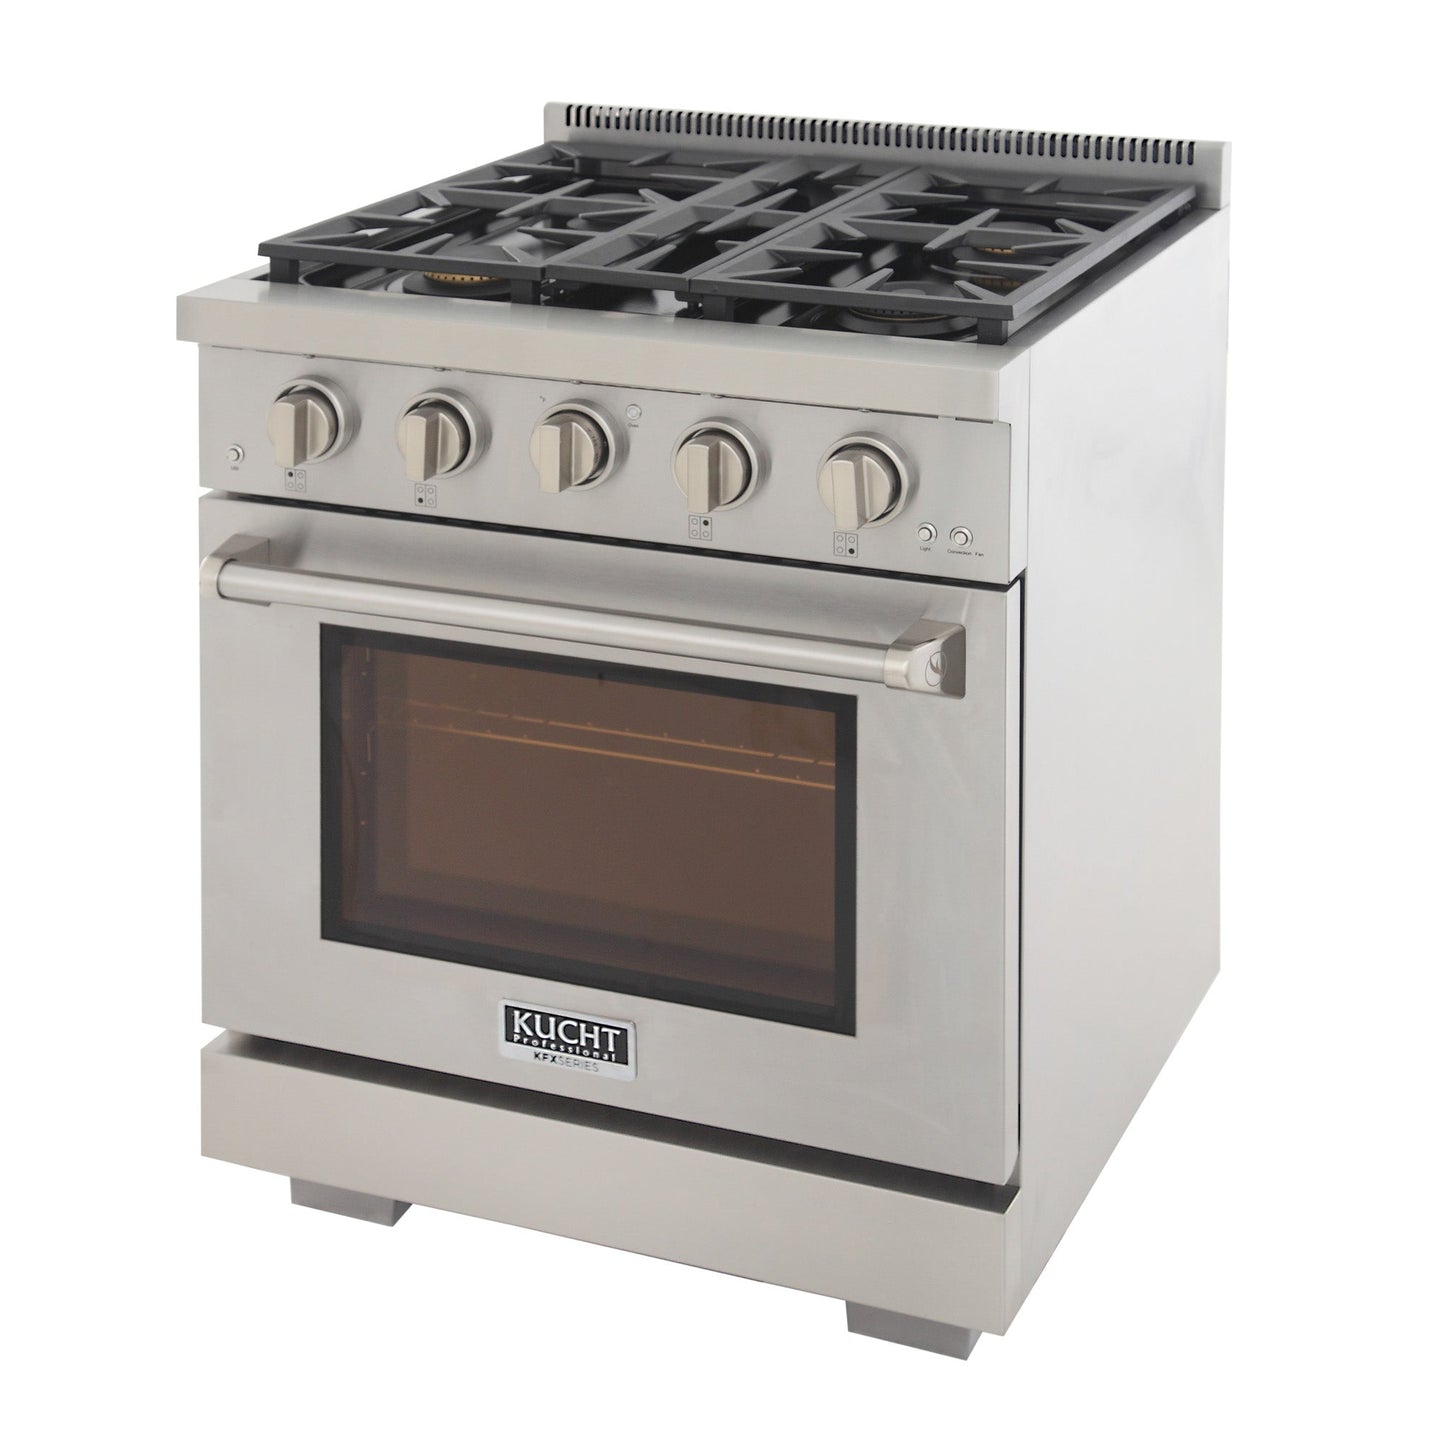 Kucht KFX Series 30" Freestanding Propane Gas Range With 4 Burners and Classic Silver Knobs